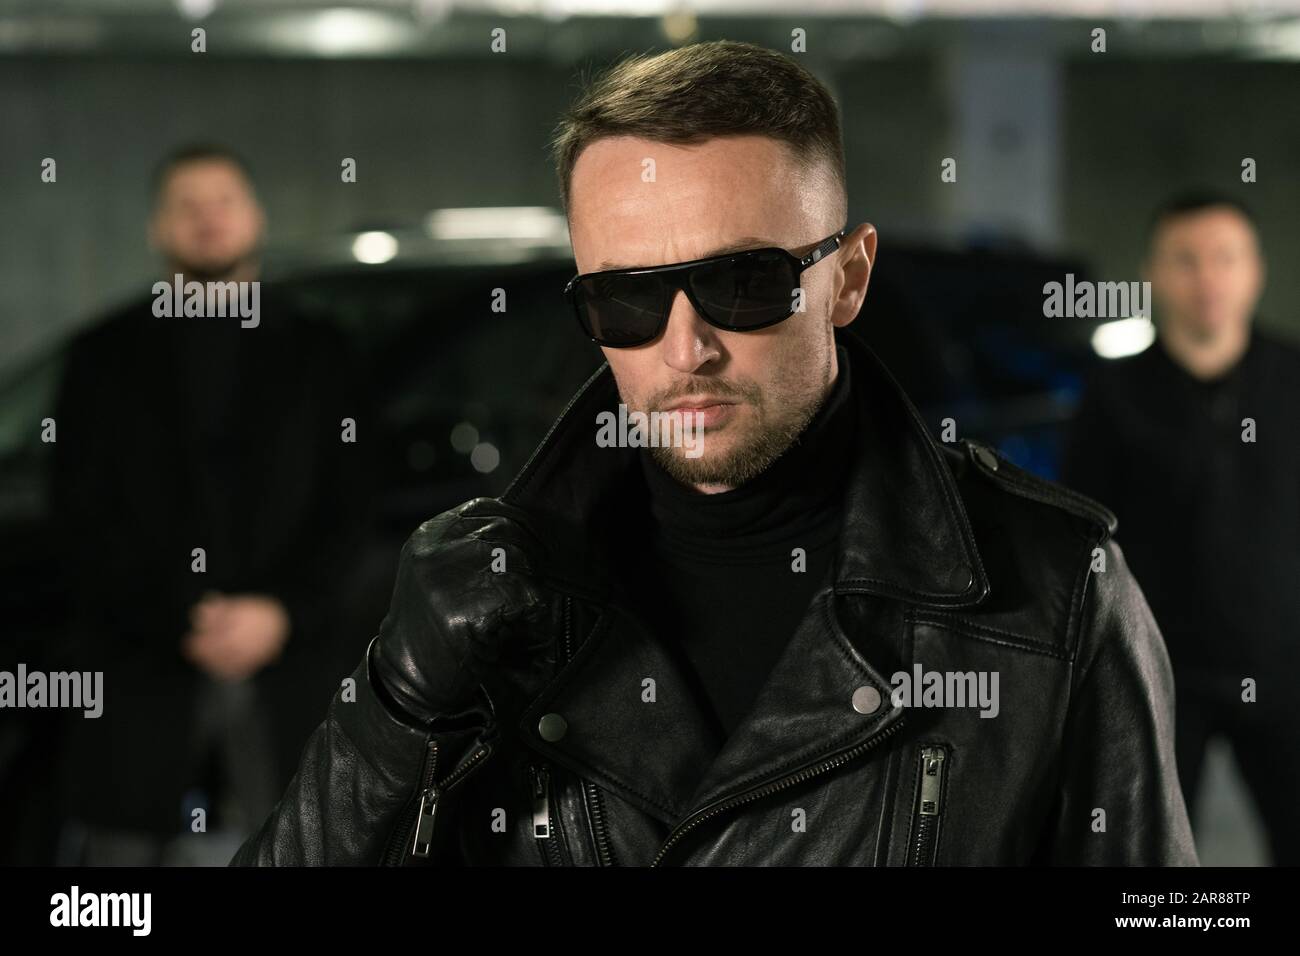 Male spy or gangster in sunglasses, black leather gloves and jacket Stock Photo